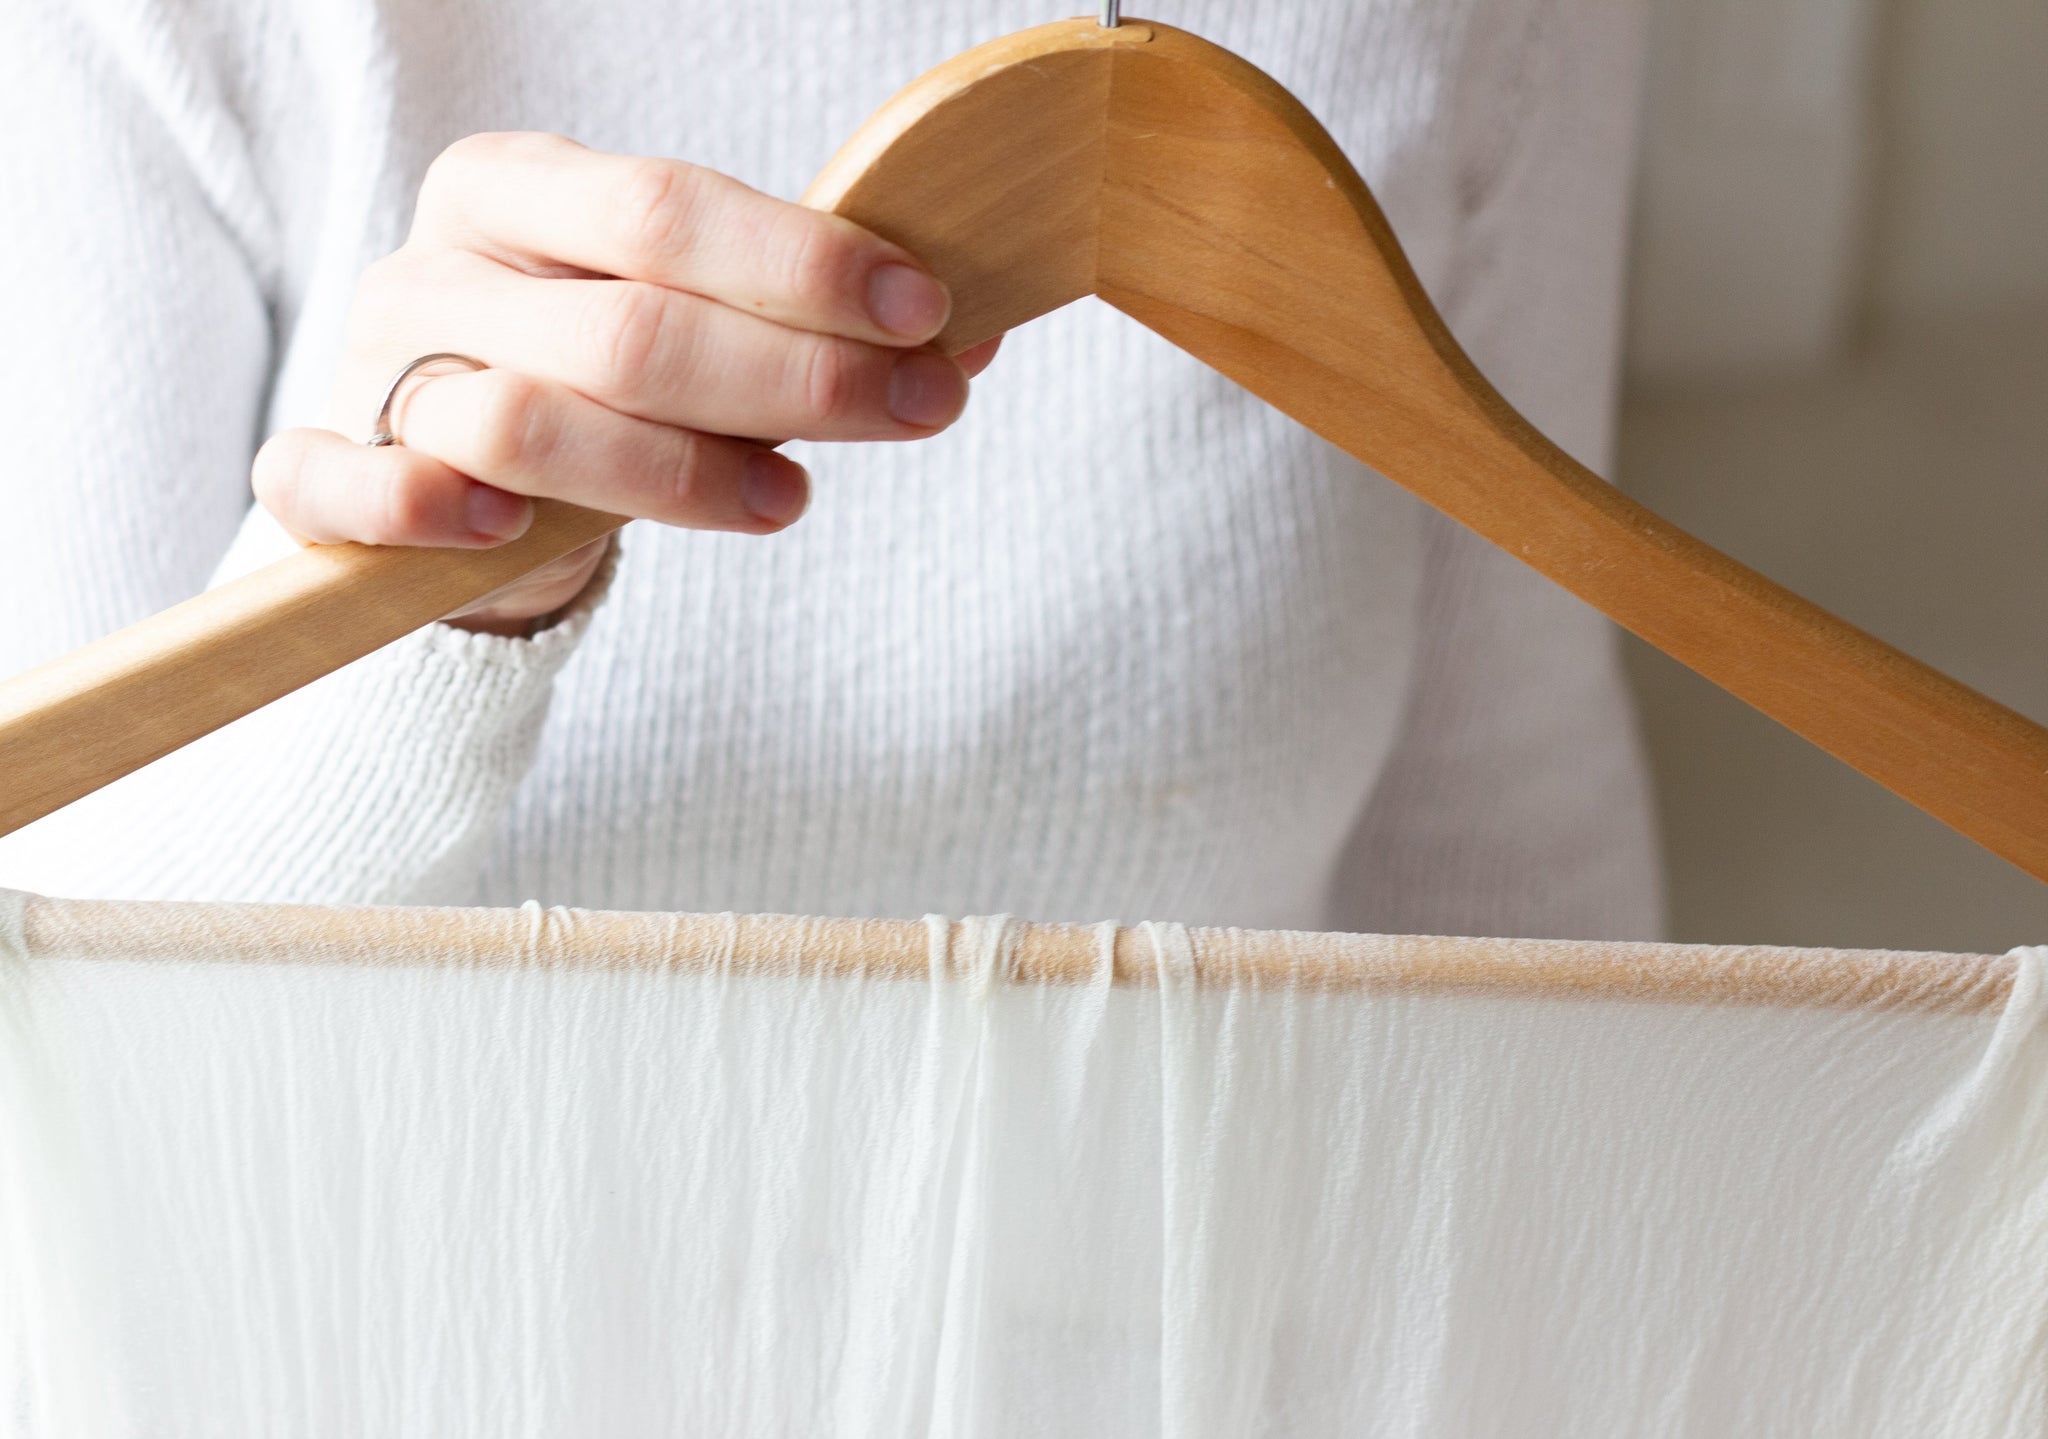 Hang on a wooden hanger or dry flat when washing silk